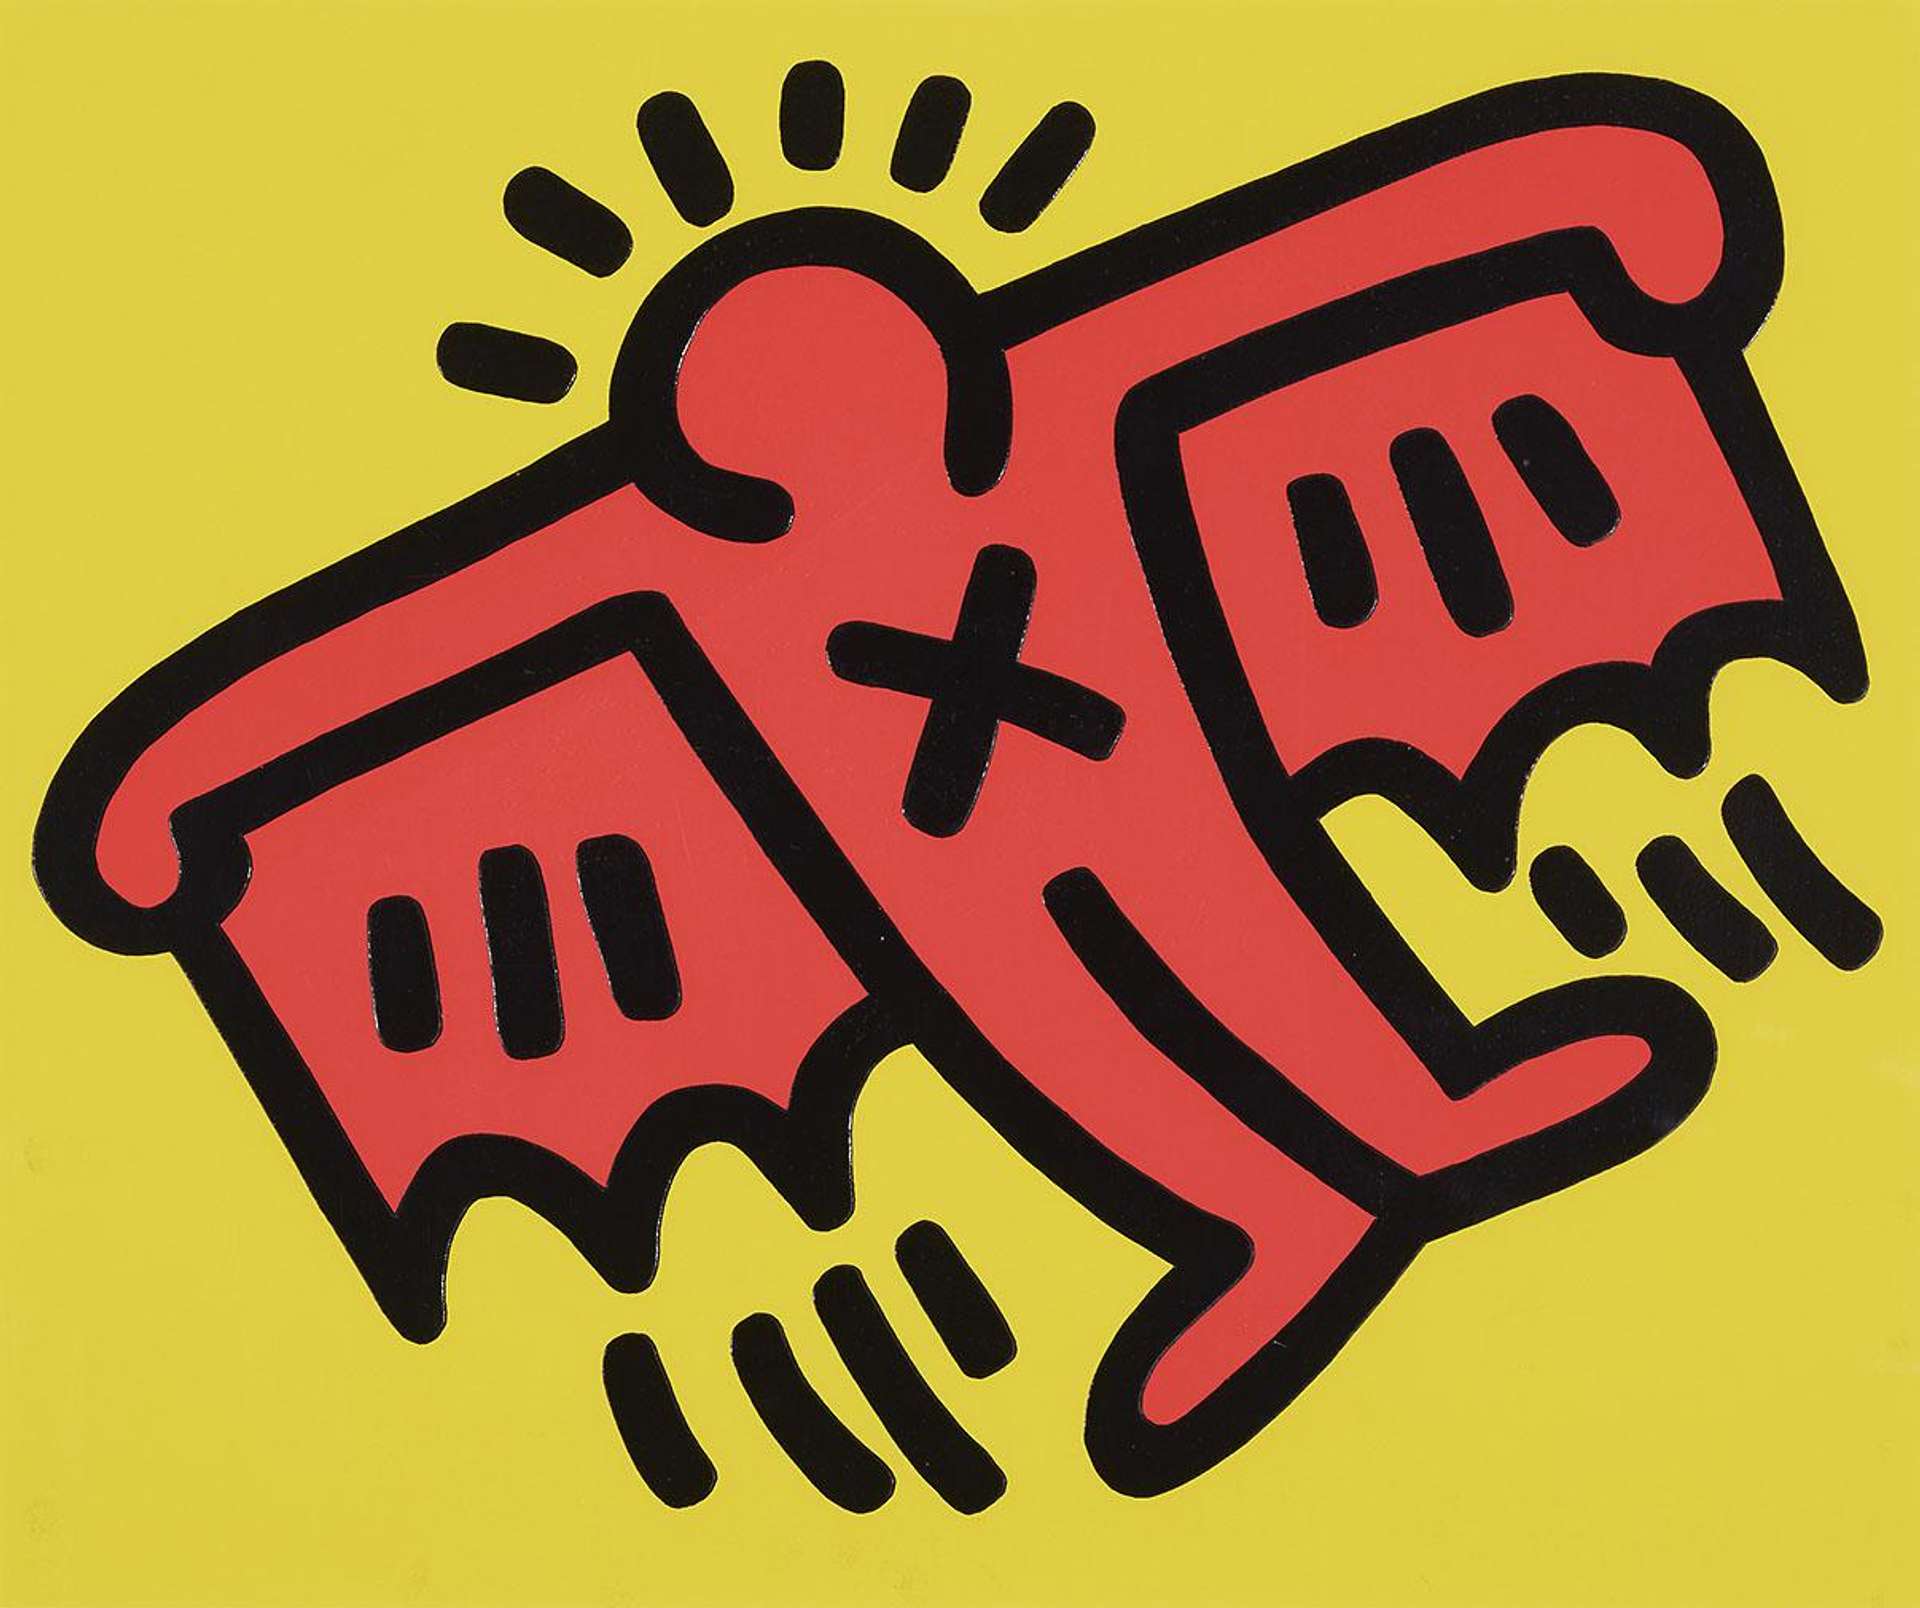 Iconography and Activism: The Dual Nature of Keith Haring’s Icons